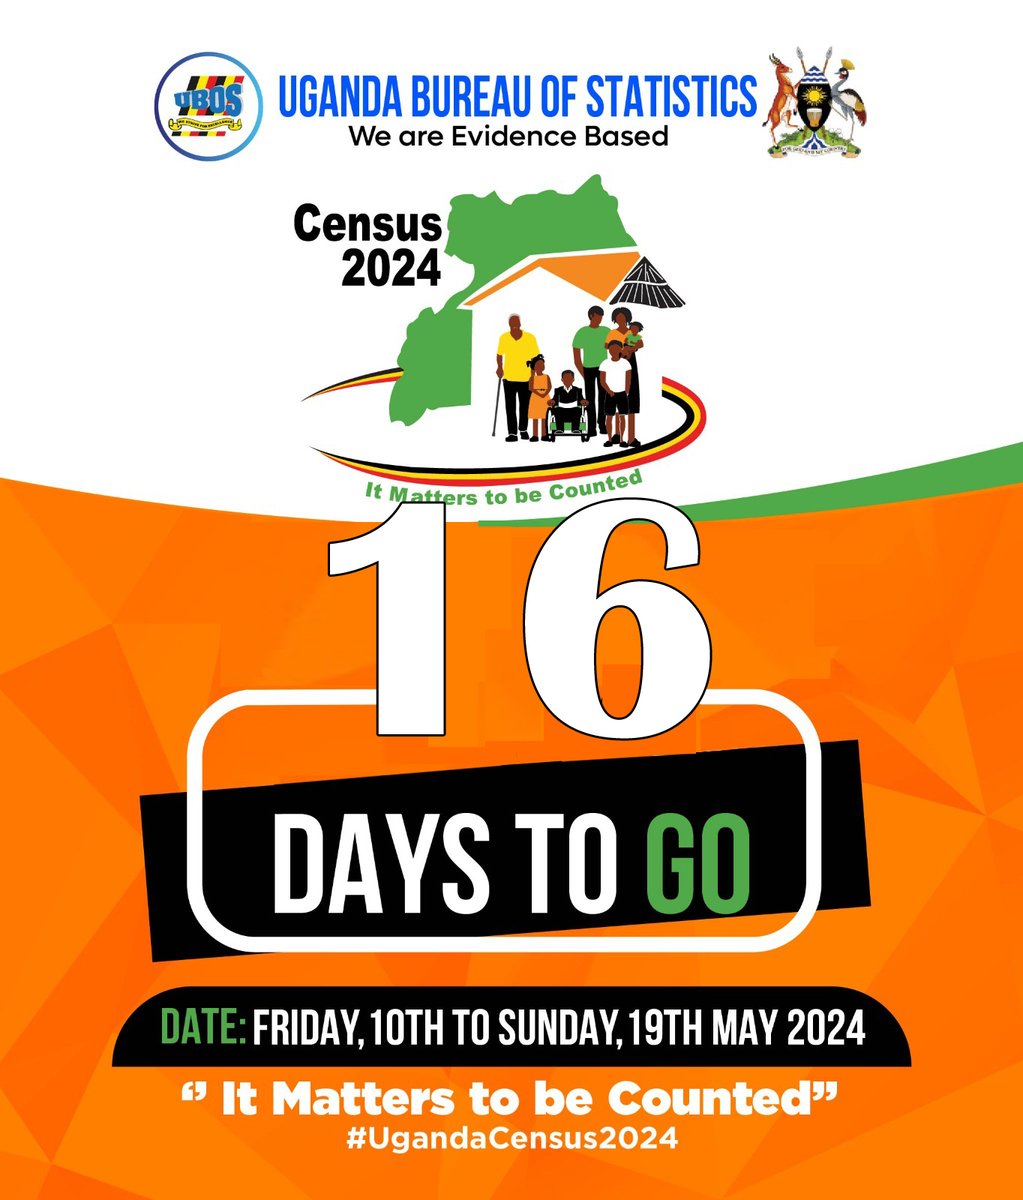 Are you set, Uganda? We're on a countdown with only 16 days left to the 10th of May 2024 - the day earmarked for the National Housing and Population Census. The anticipation is building, isn't it? Good morning🙂